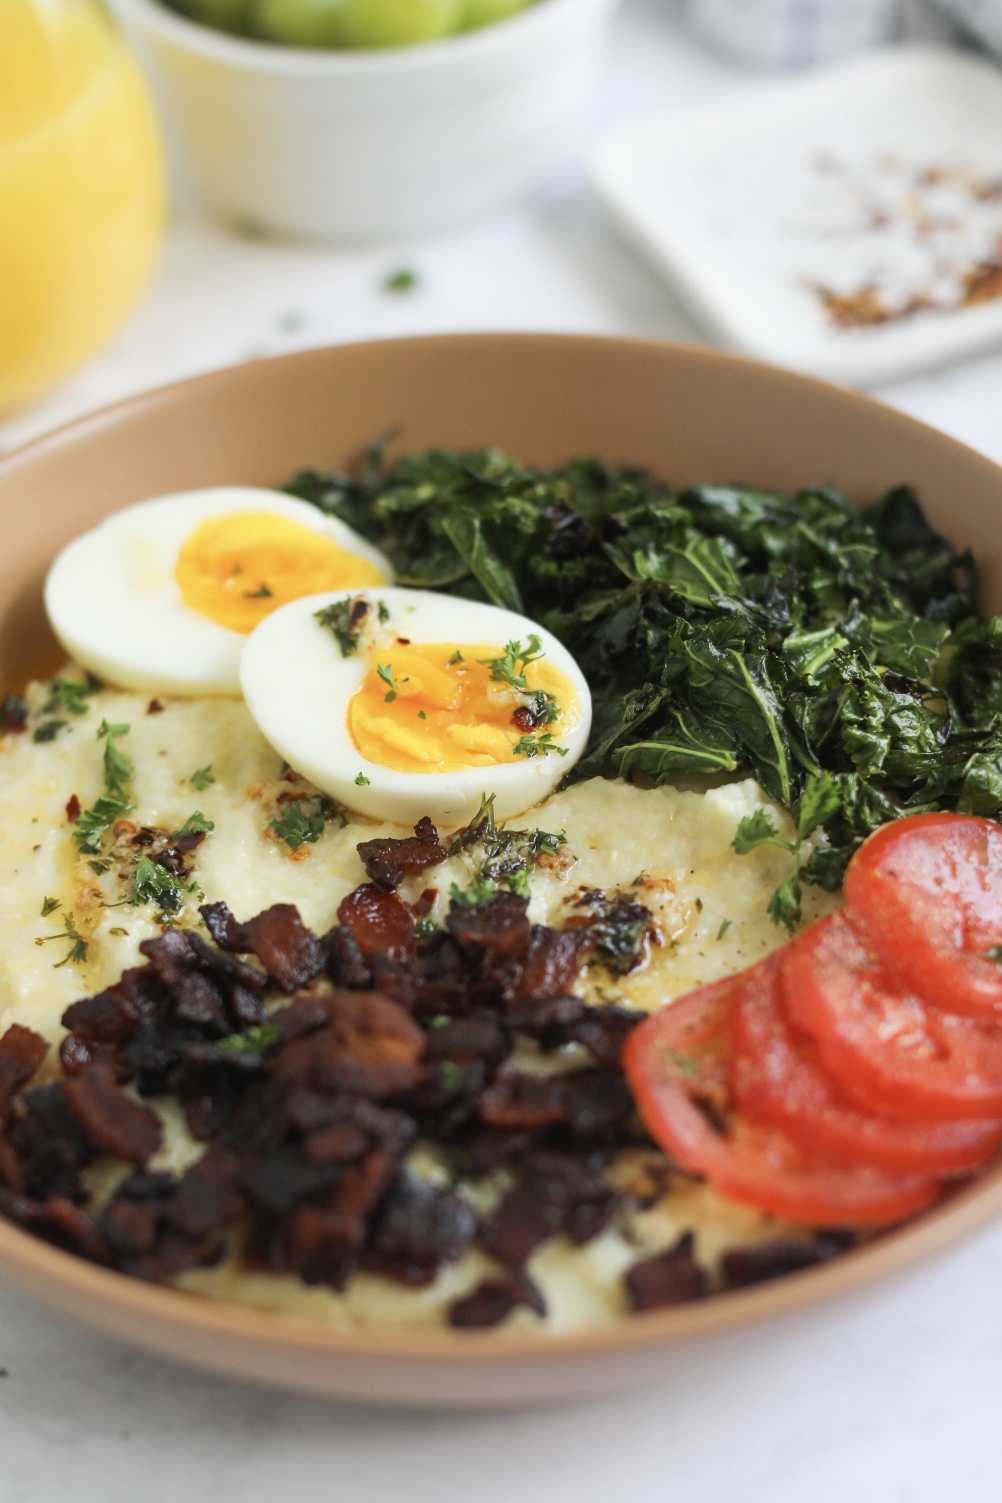 Soft boiled eggs and sauteed kale in focus of Southern Grits and Greens Bowl. Out of focus behind bowl is a glass of orange juice in a wine glass, small plate of crush red pepper flakes and a white bowl of grapes.